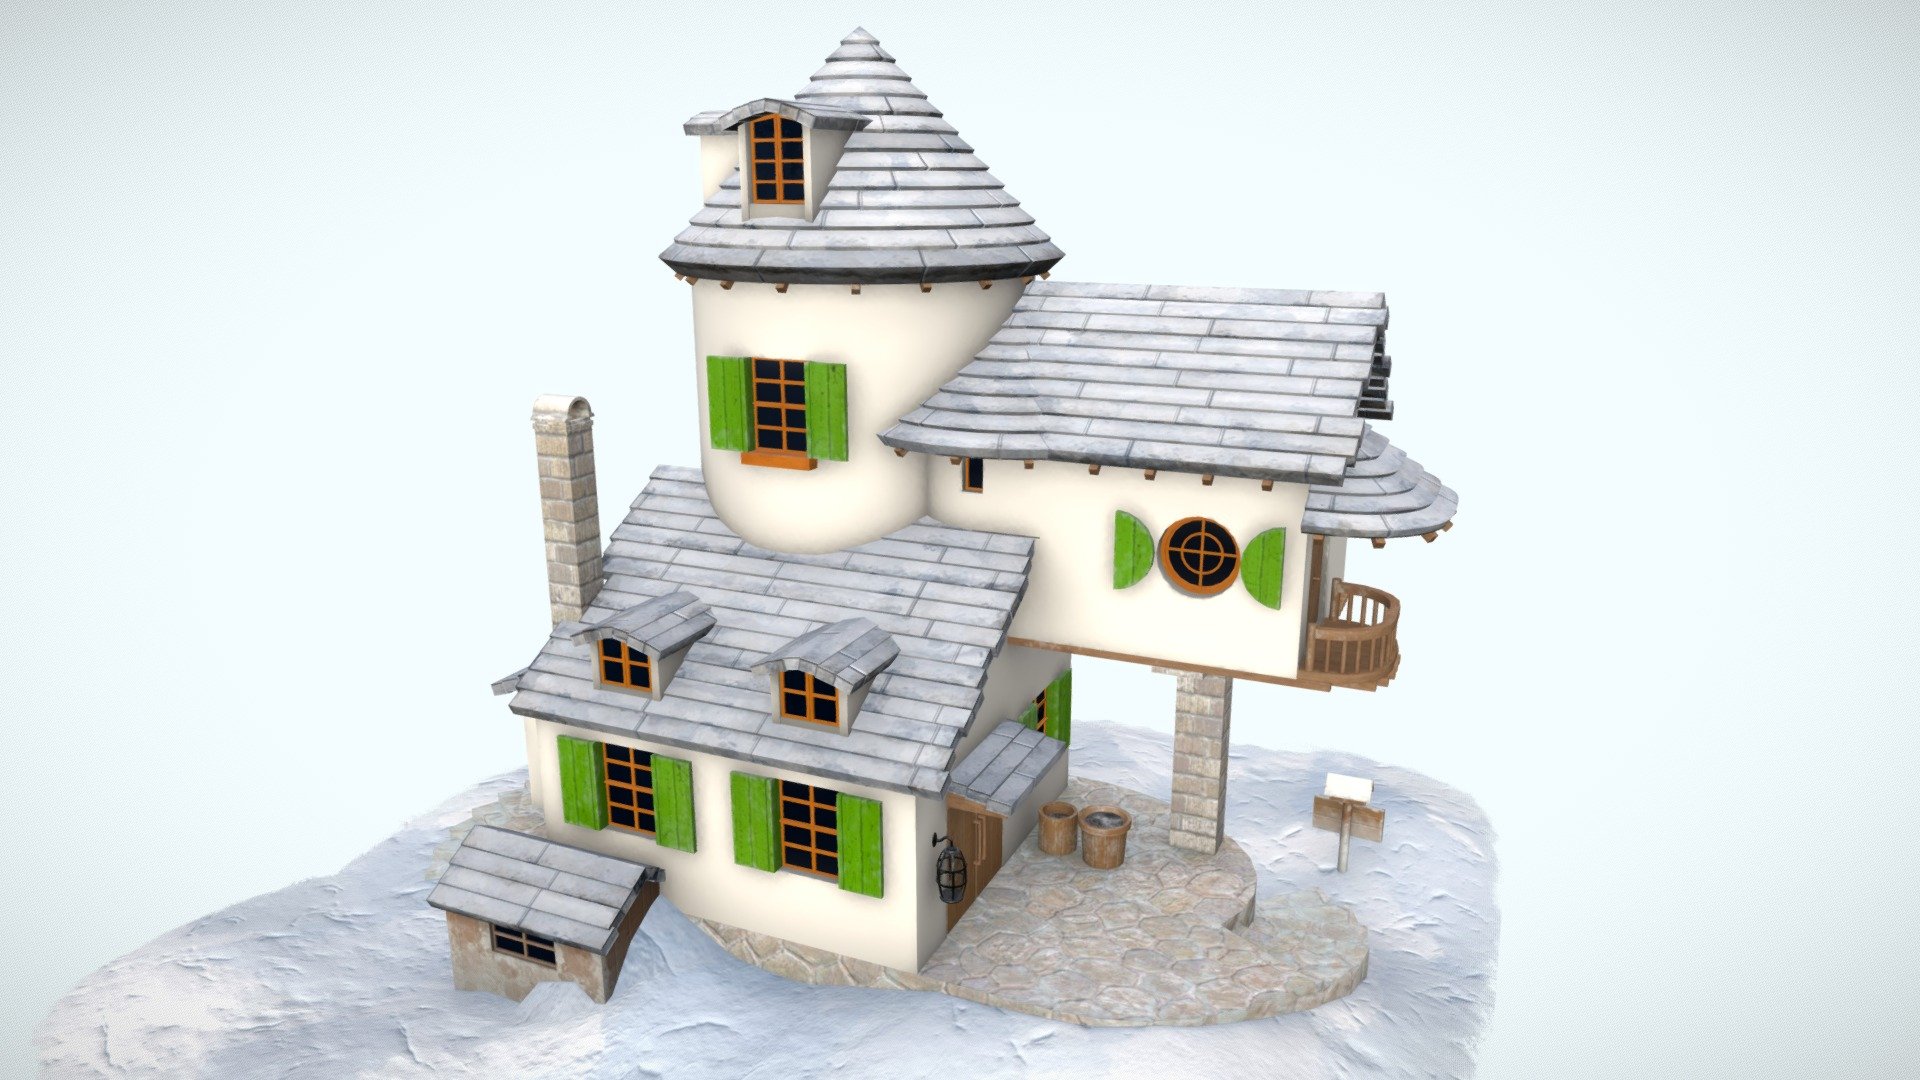 Low poly 3D model created based on illustrations of the Seven Dwarve's House in &ldquo;Monogatari no Ie